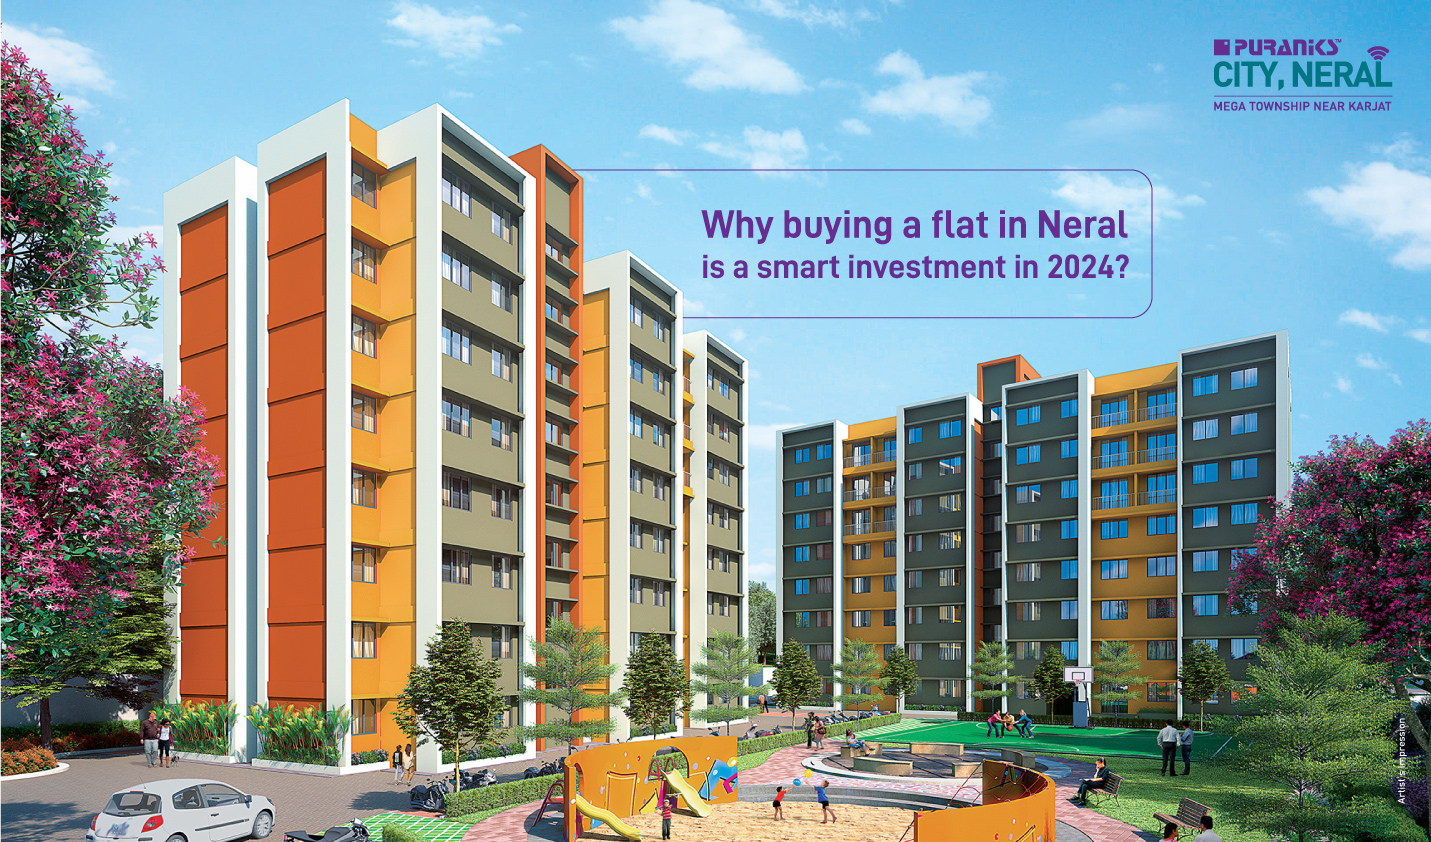 Why buying a flat in Neral is a smart investment in 2024?